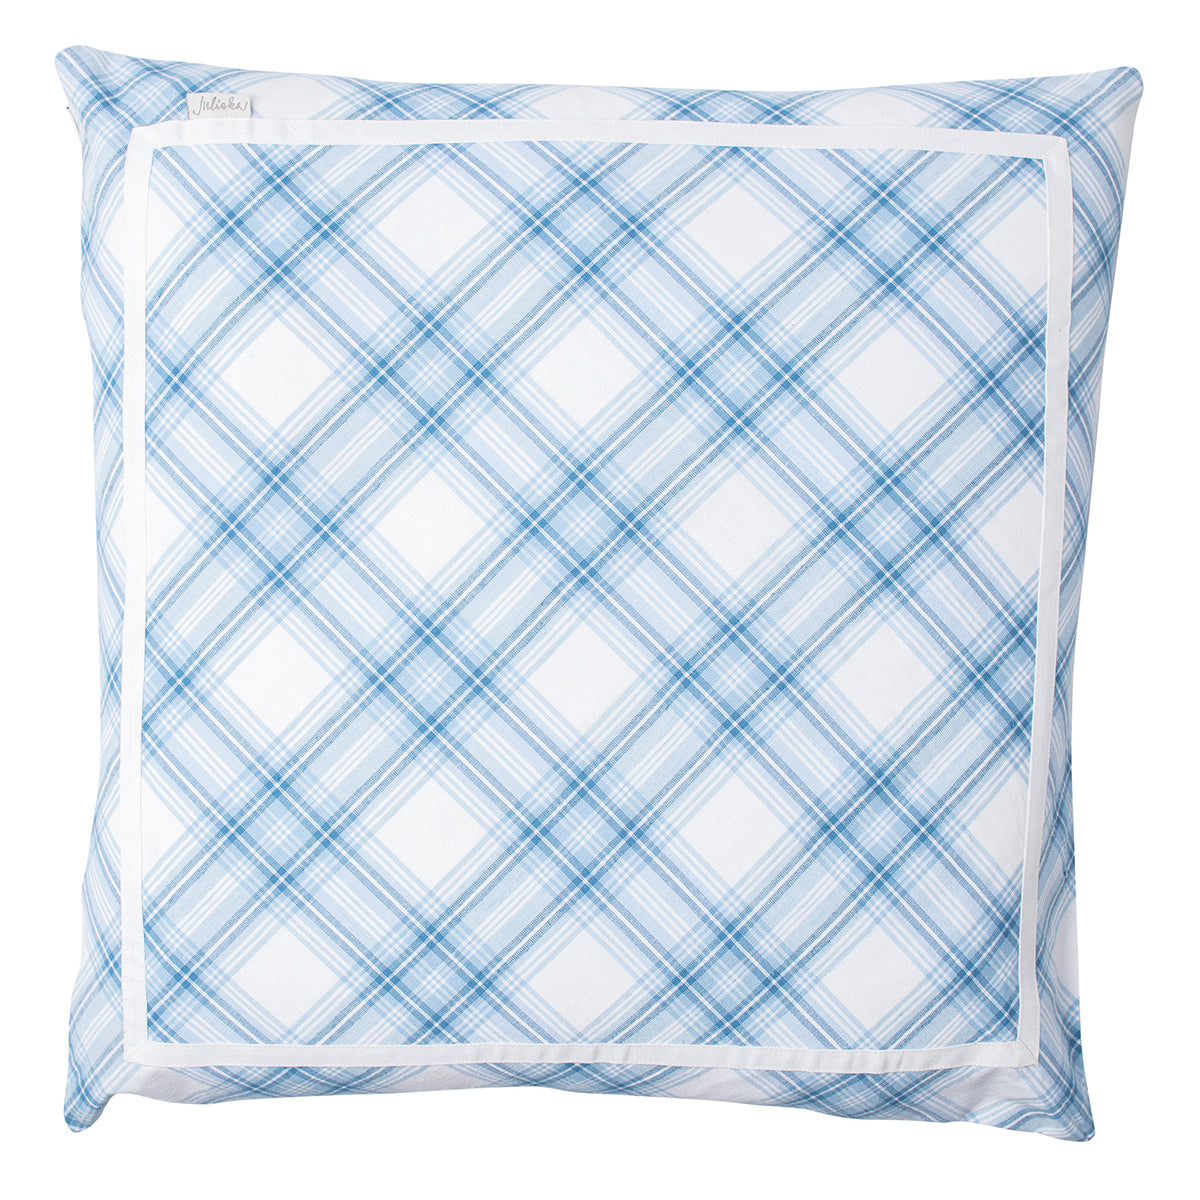 Accent your living room, bedrooms or sitting room with classic Tartan in a soft Chambray blue hue! This 20-inch plaid pillow is trimmed with a soft velvet border and brings a welcome amount of whimsy to every room.